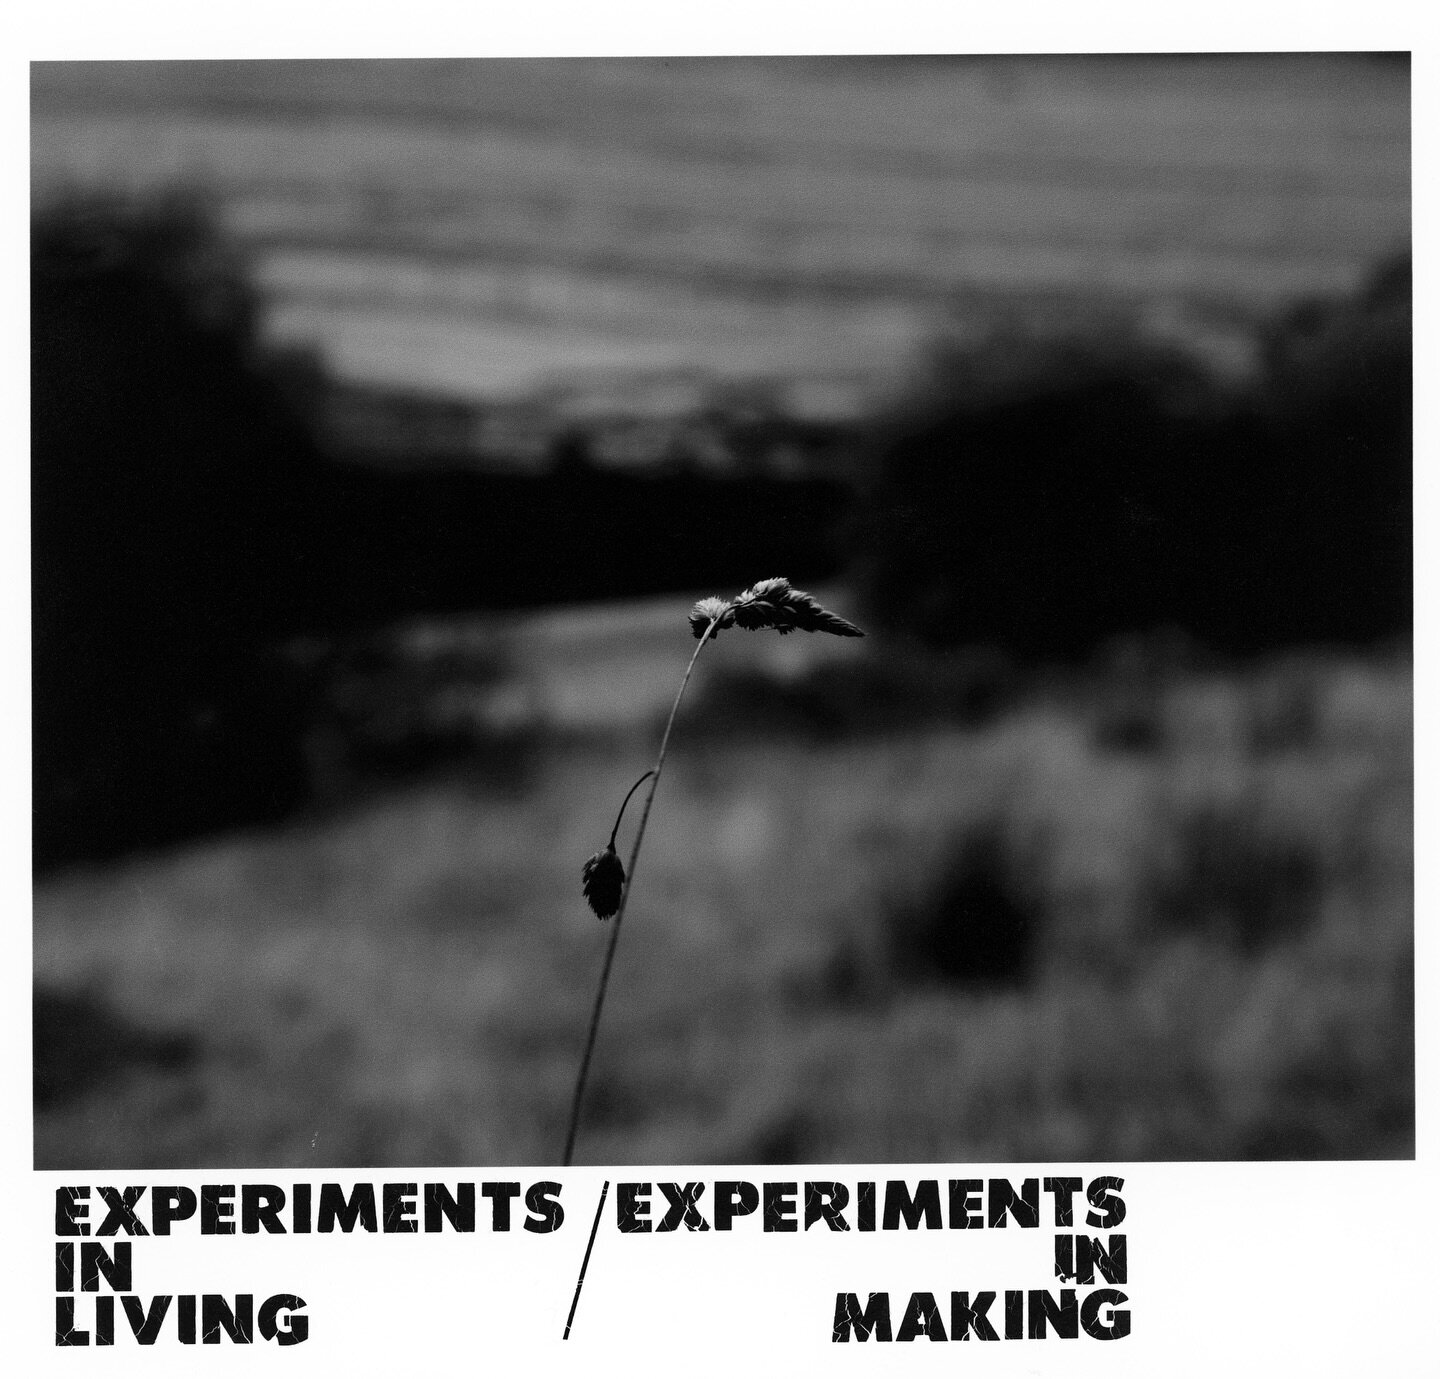 My exhibition titled Experiments in Living / Experiments in Making will be @polyfalmouth from 6-10th February. 

Private view is Tuesday 6th from 17:00-19:00 if you&rsquo;re in the area and want to come along.

#experimentsinliving #experimentsinmaki